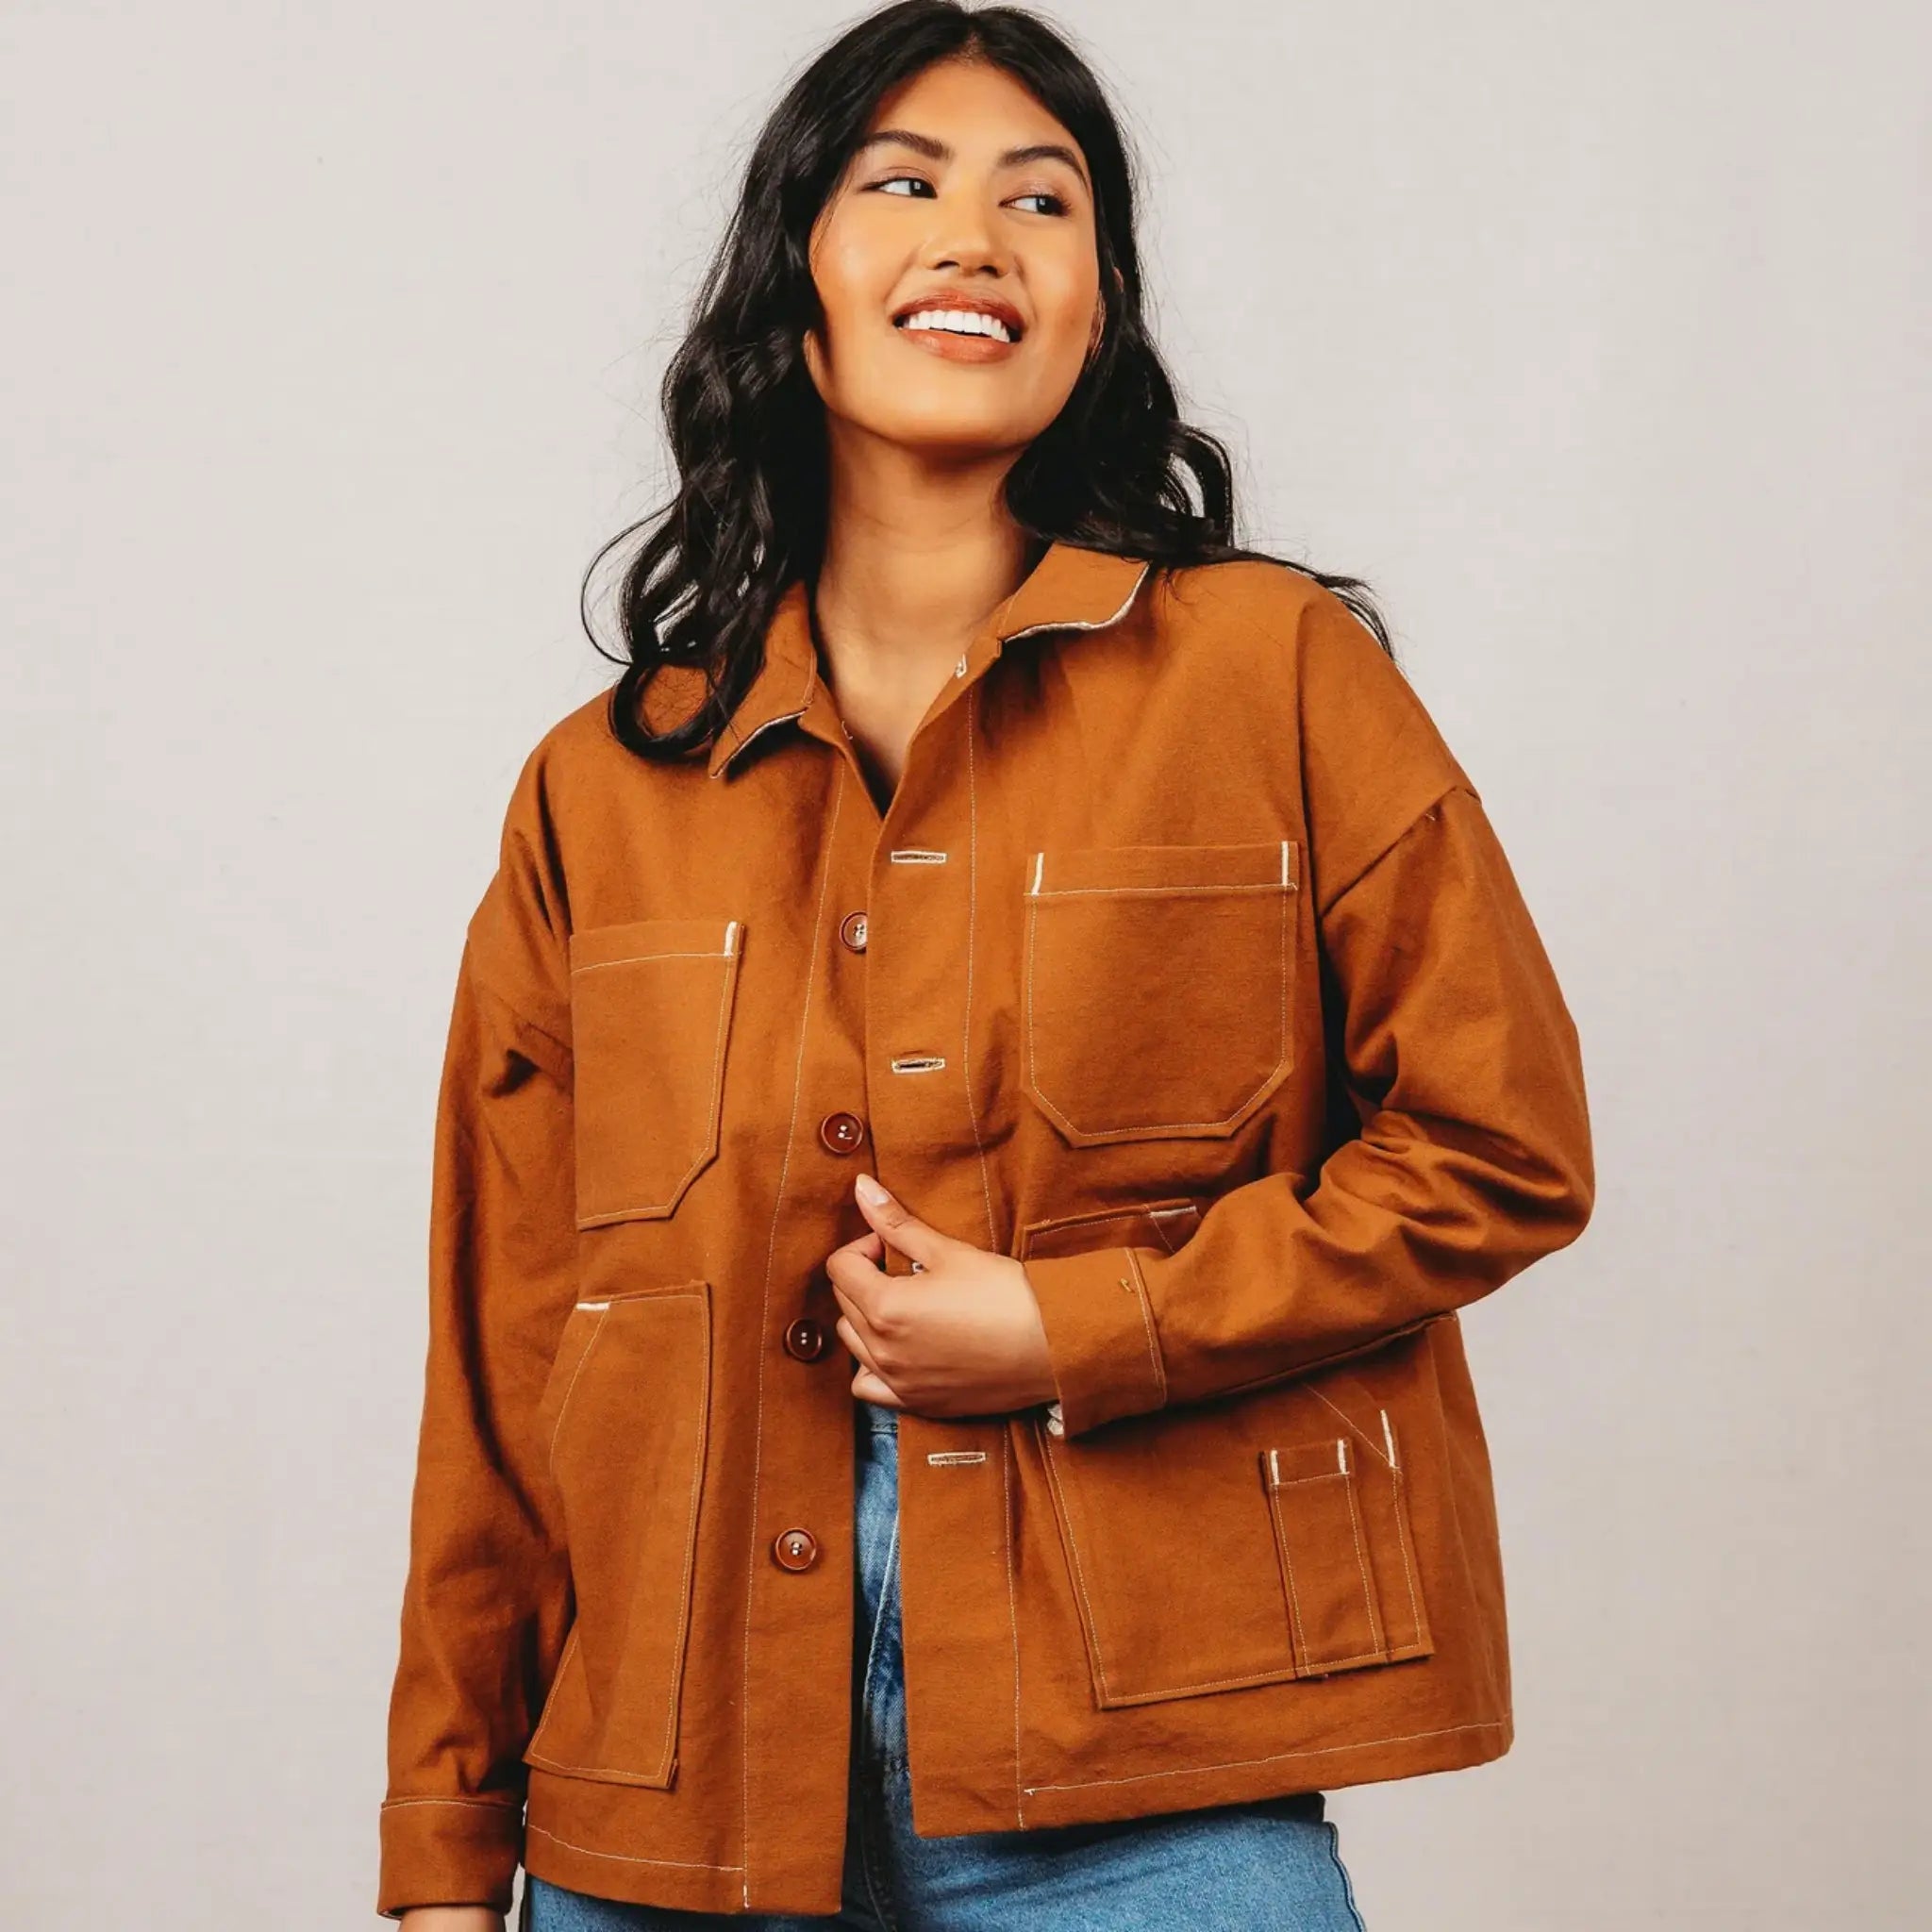 Buy The Ilford Jacket sewing pattern from Friday Pattern Company.